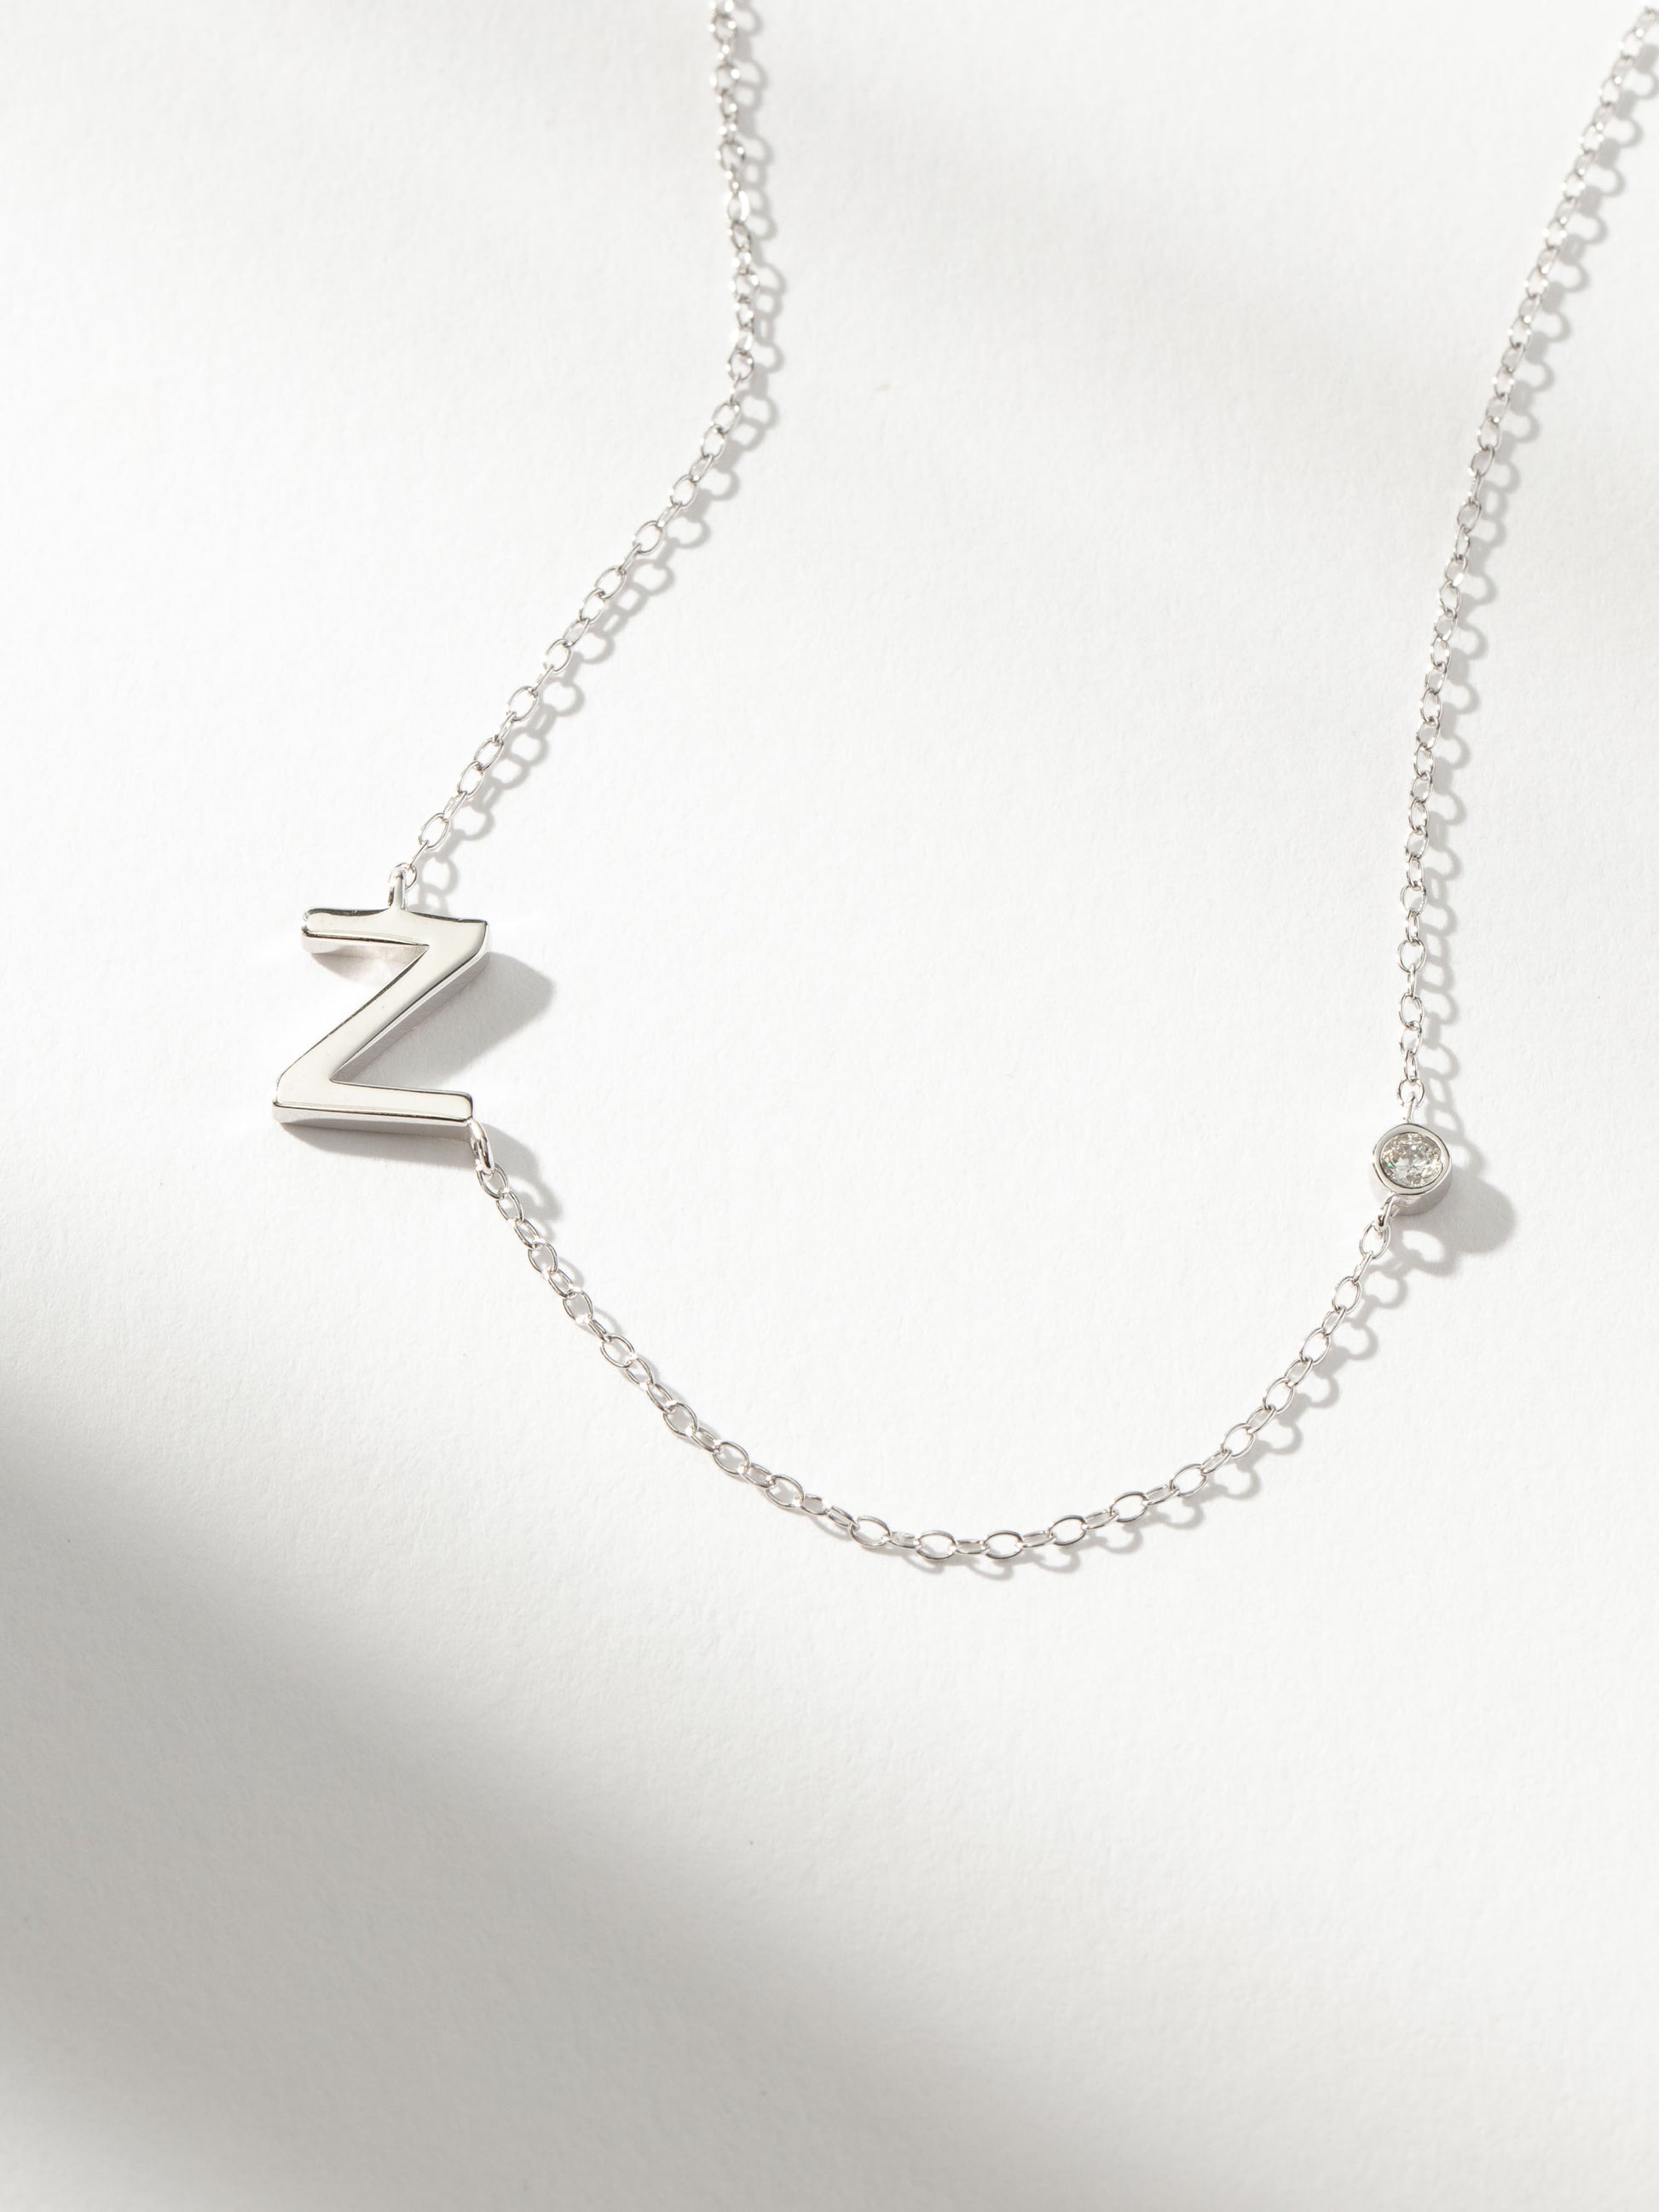 Personalized Touch Necklace | Sterling Silver Z | Product Image | Uncommon James